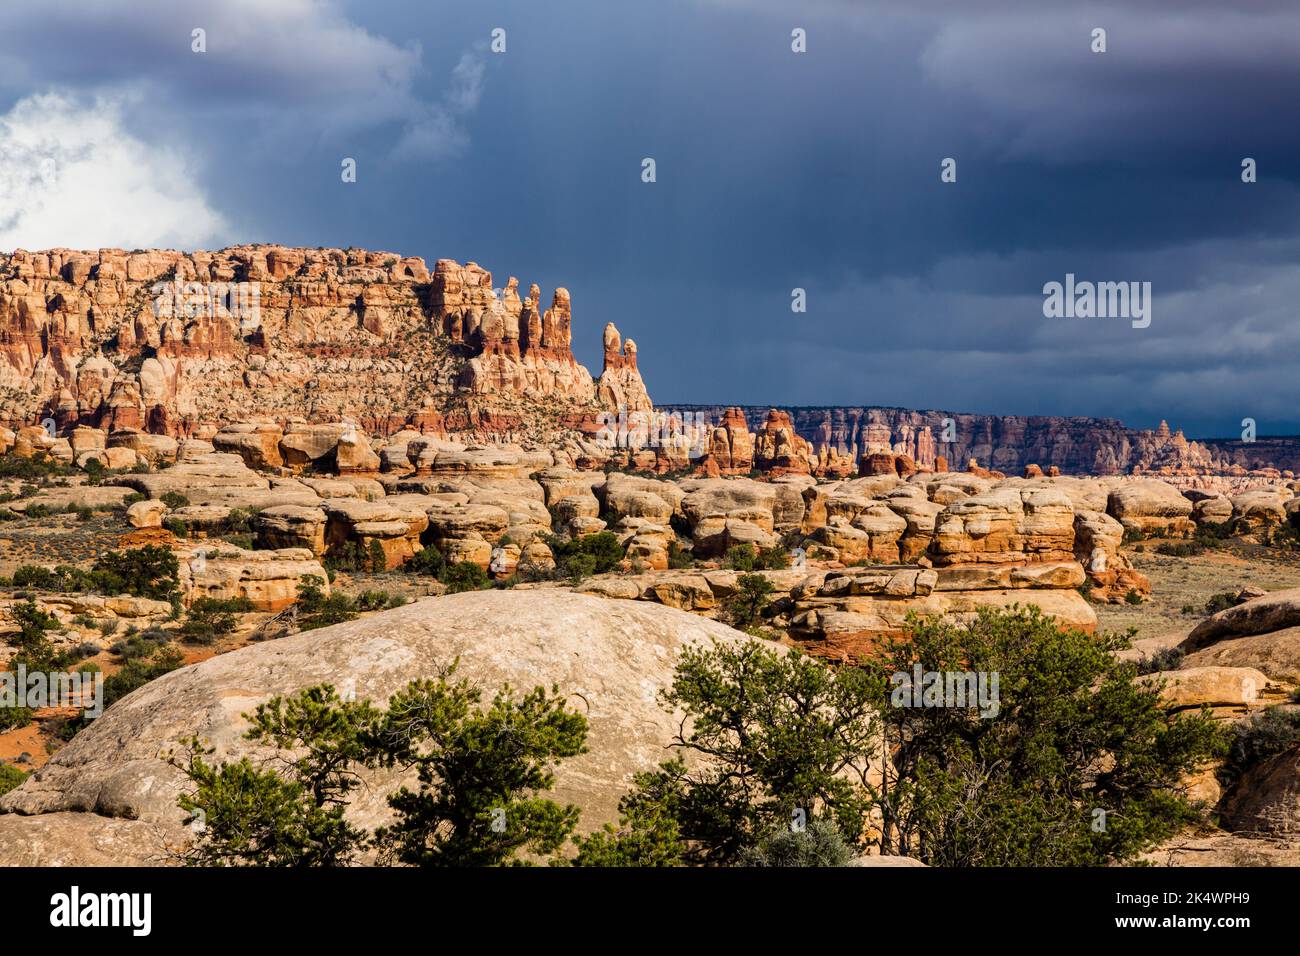 Stormy clouds over Cedar Mesa sandstone formations in the Needles District, Canyonlands National Park, Utah. Stock Photo